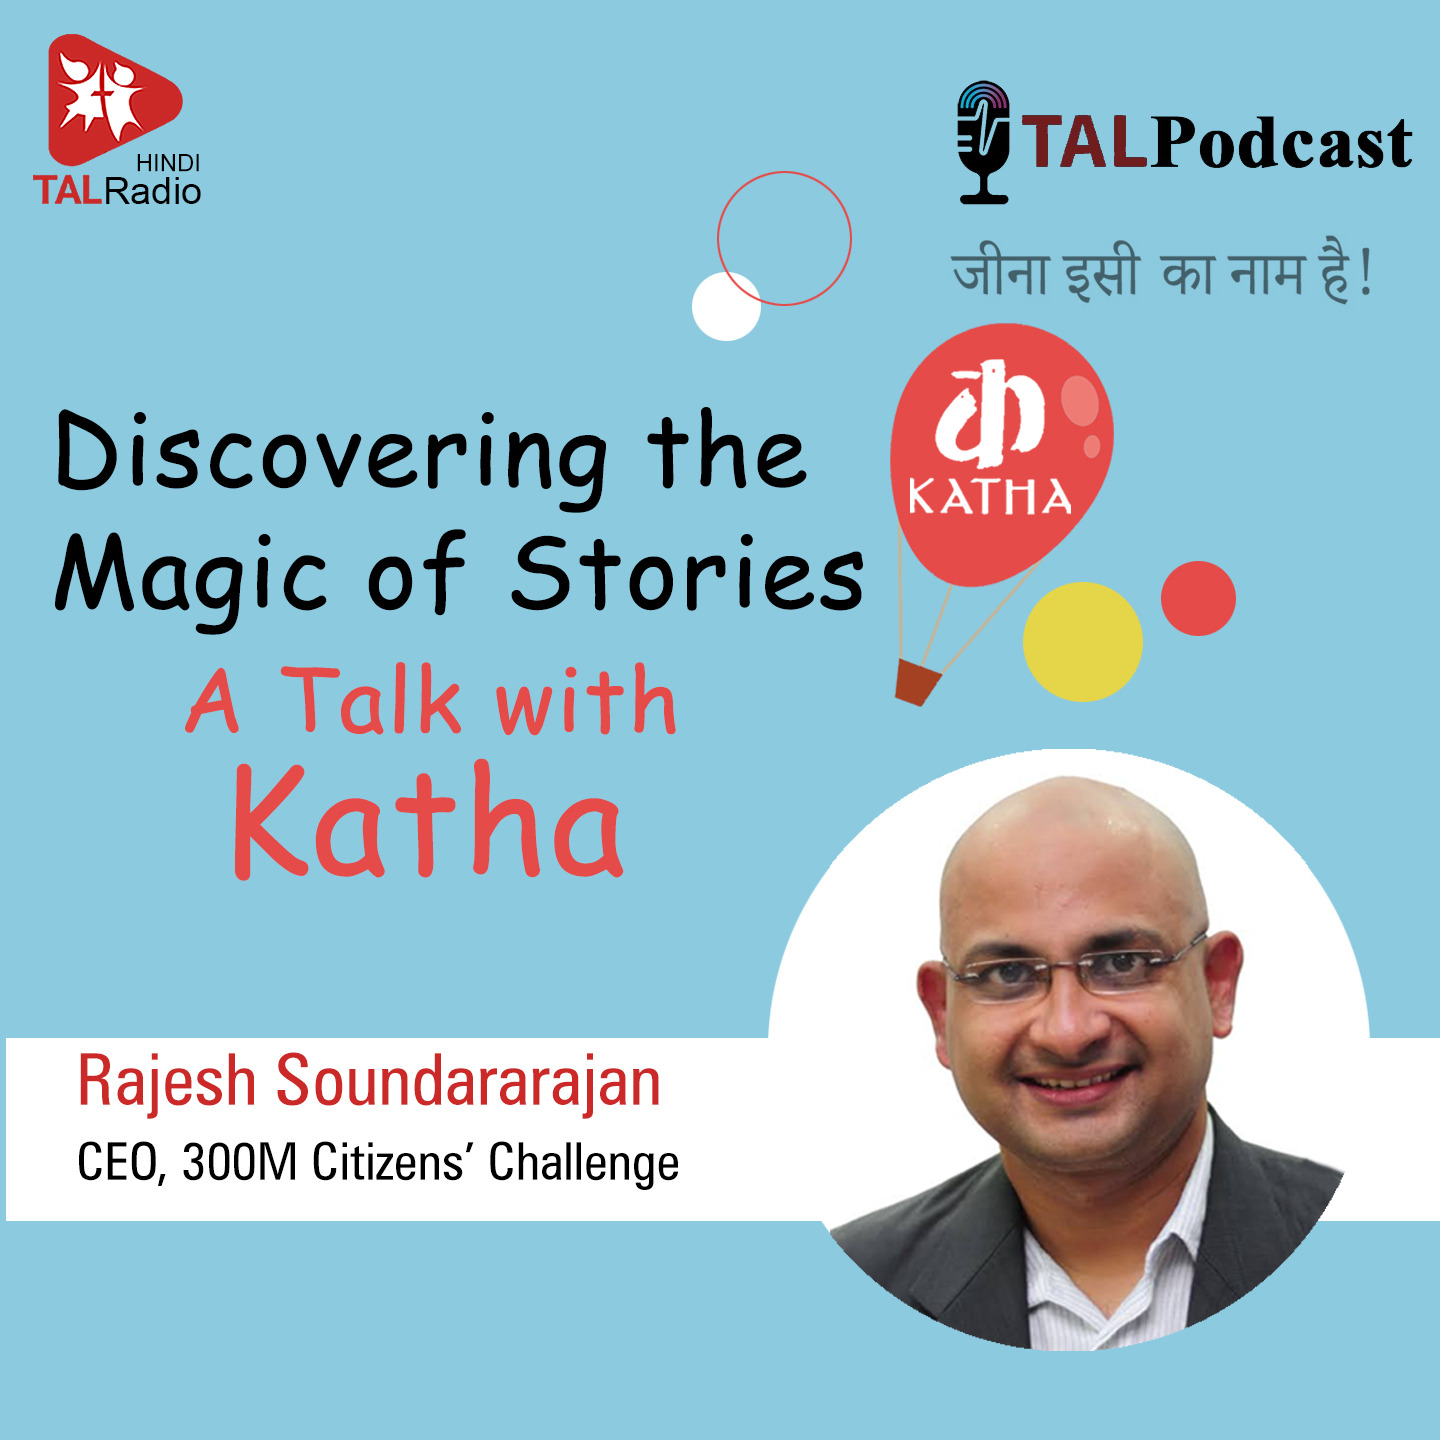 Discovering the Magic of Stories - A Talk with Katha